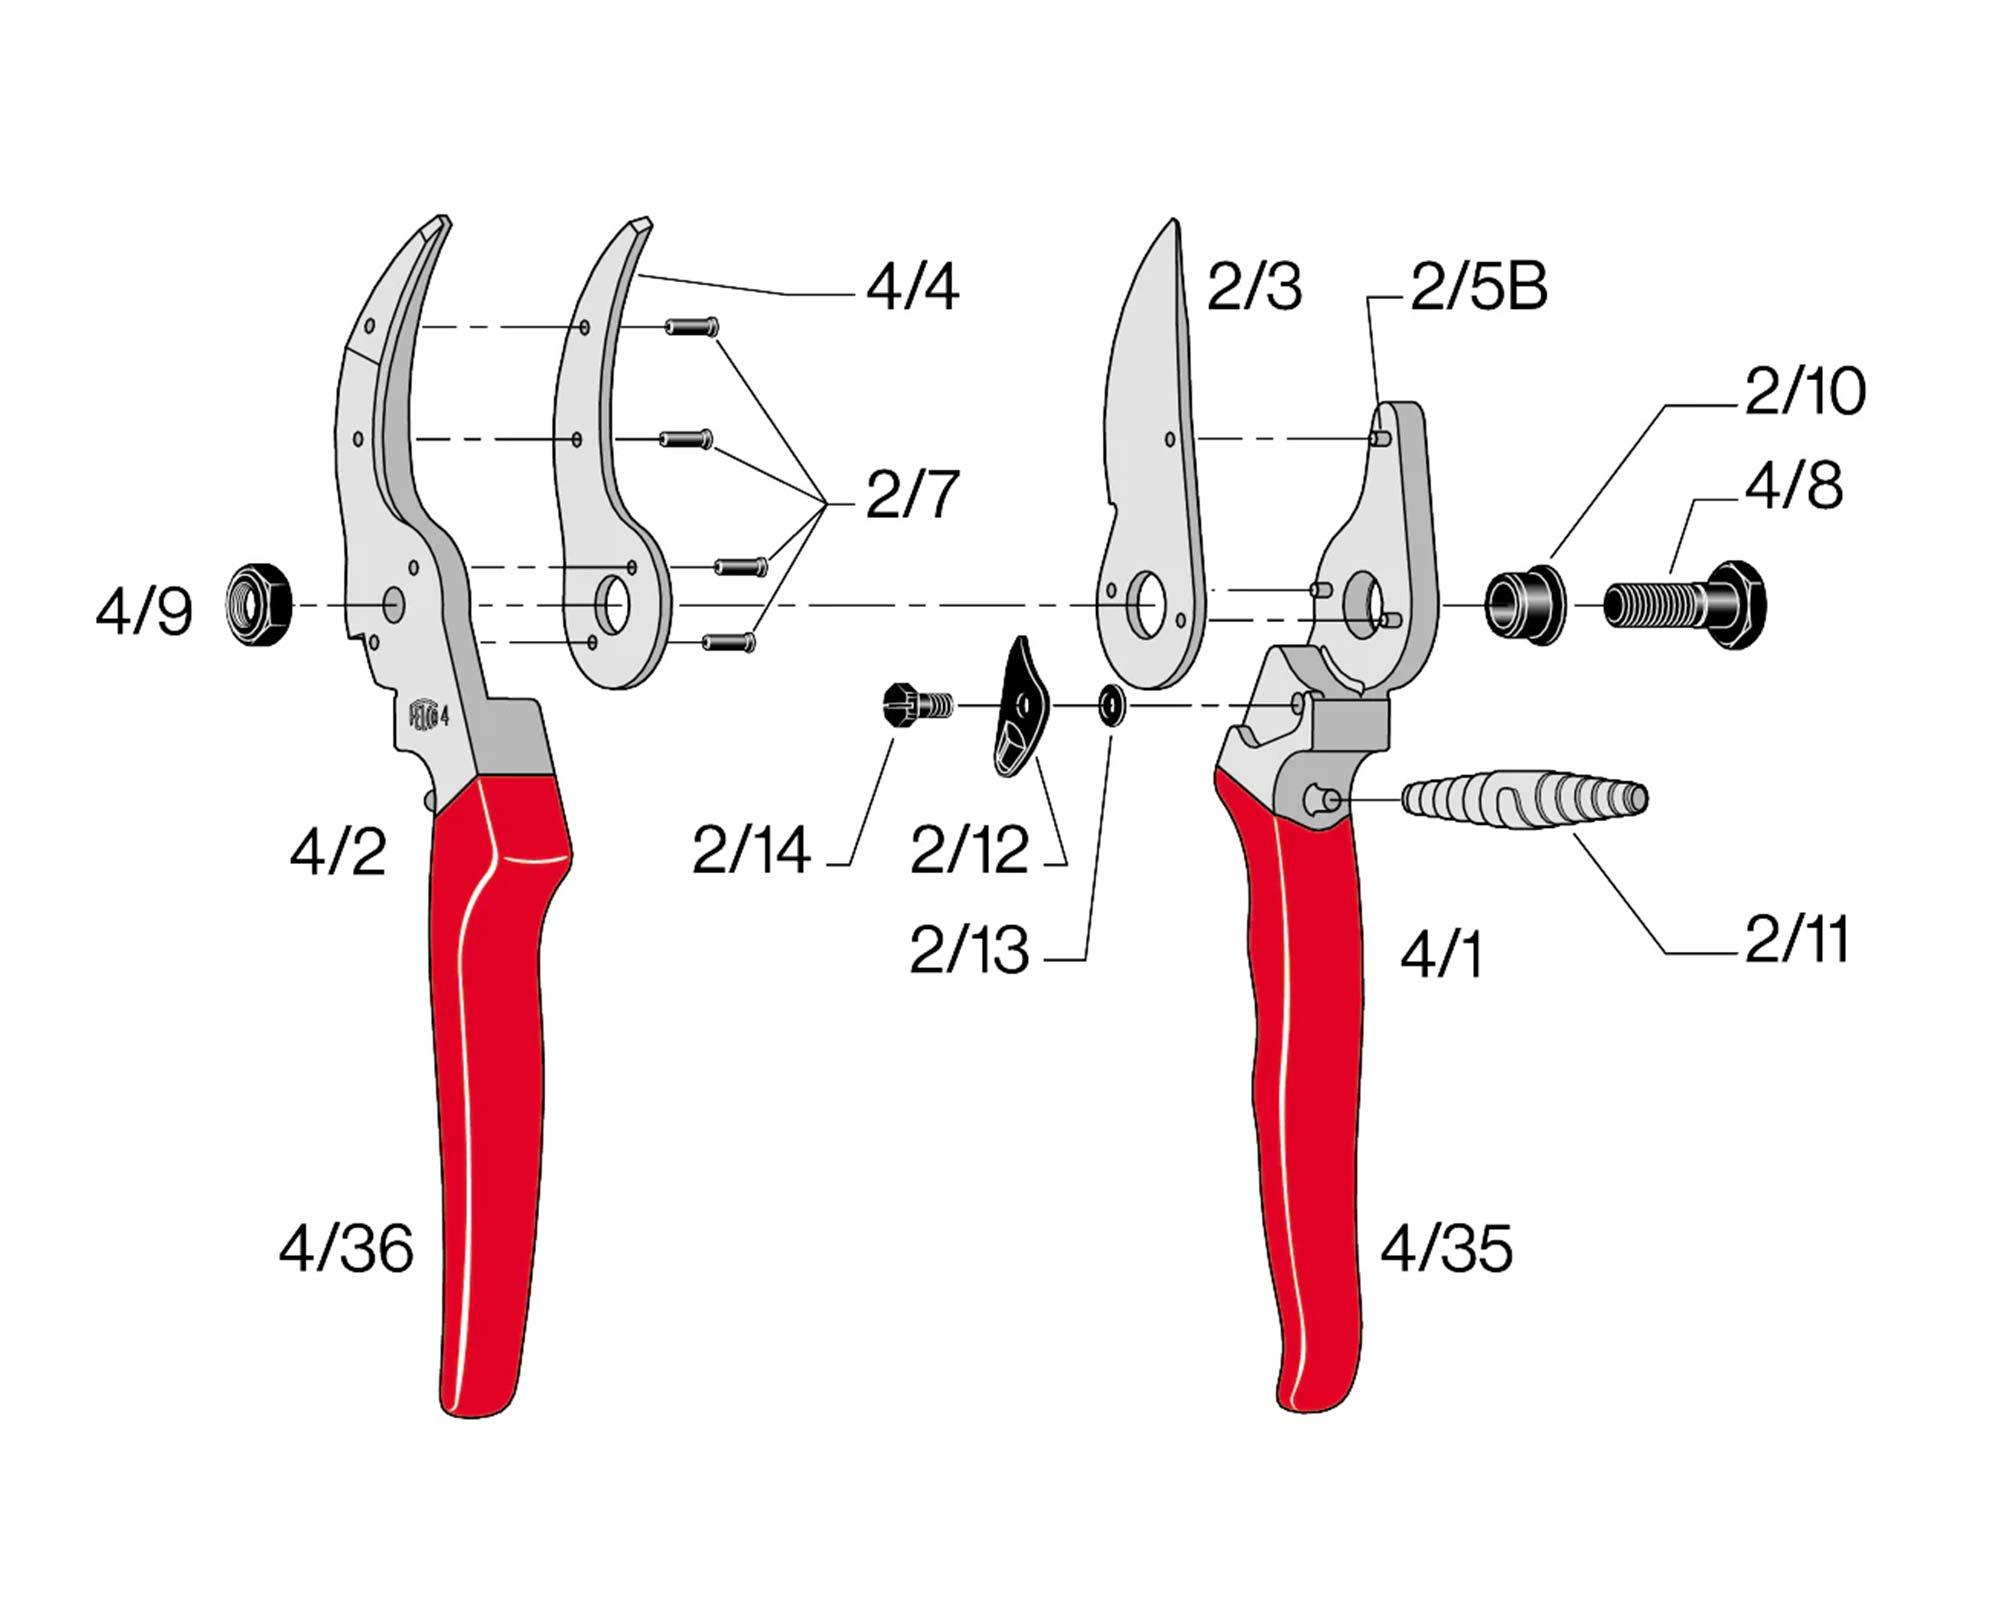 Spare parts exploded diagram for Felco 4